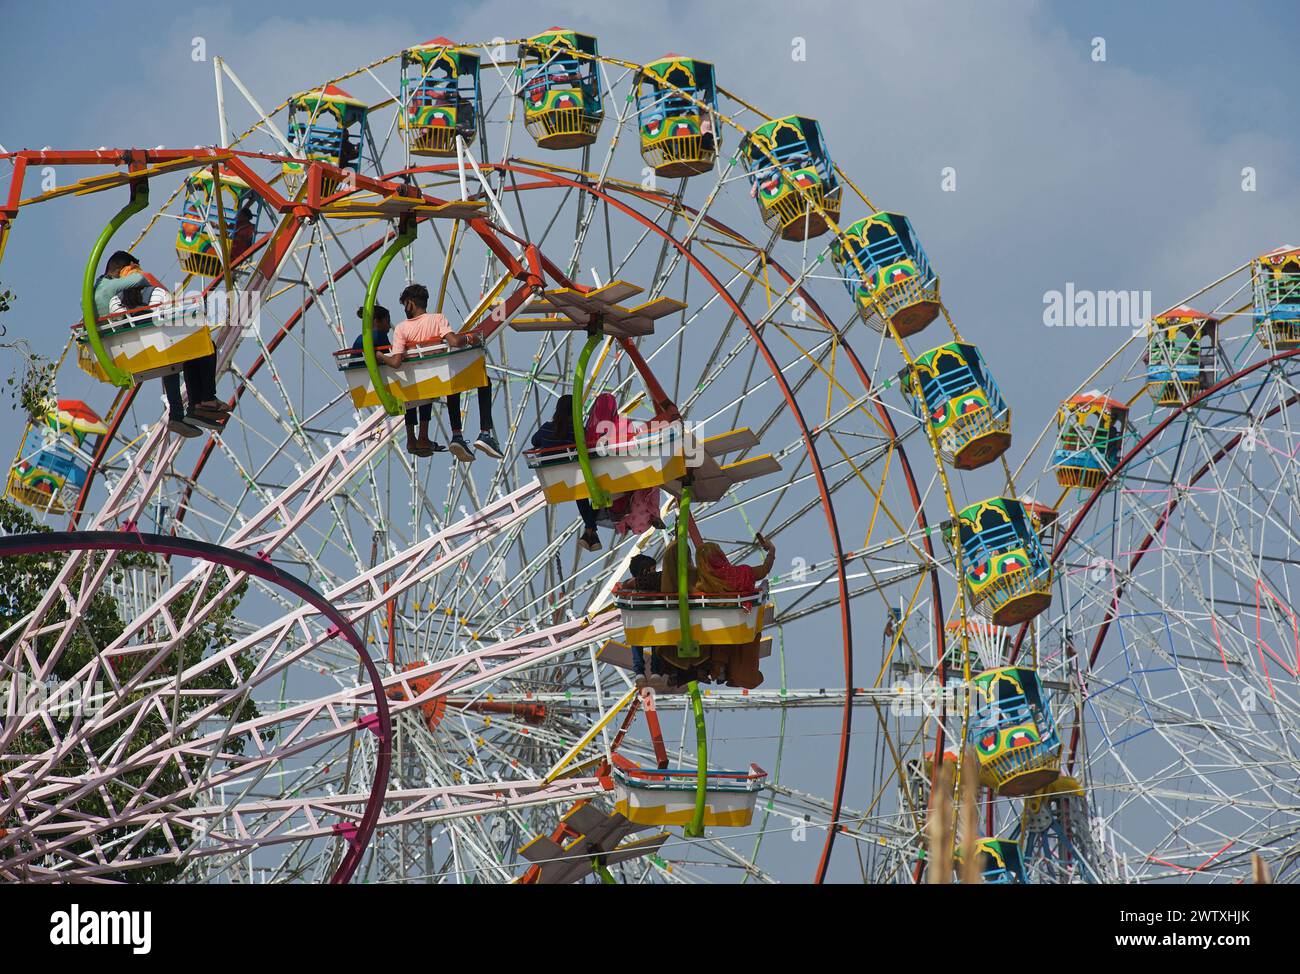 Young Indians couples enjoying a ride on ferris wheel in the ground of the desert town of Pushkar, Rajasthan, India, Asia Stock Photo